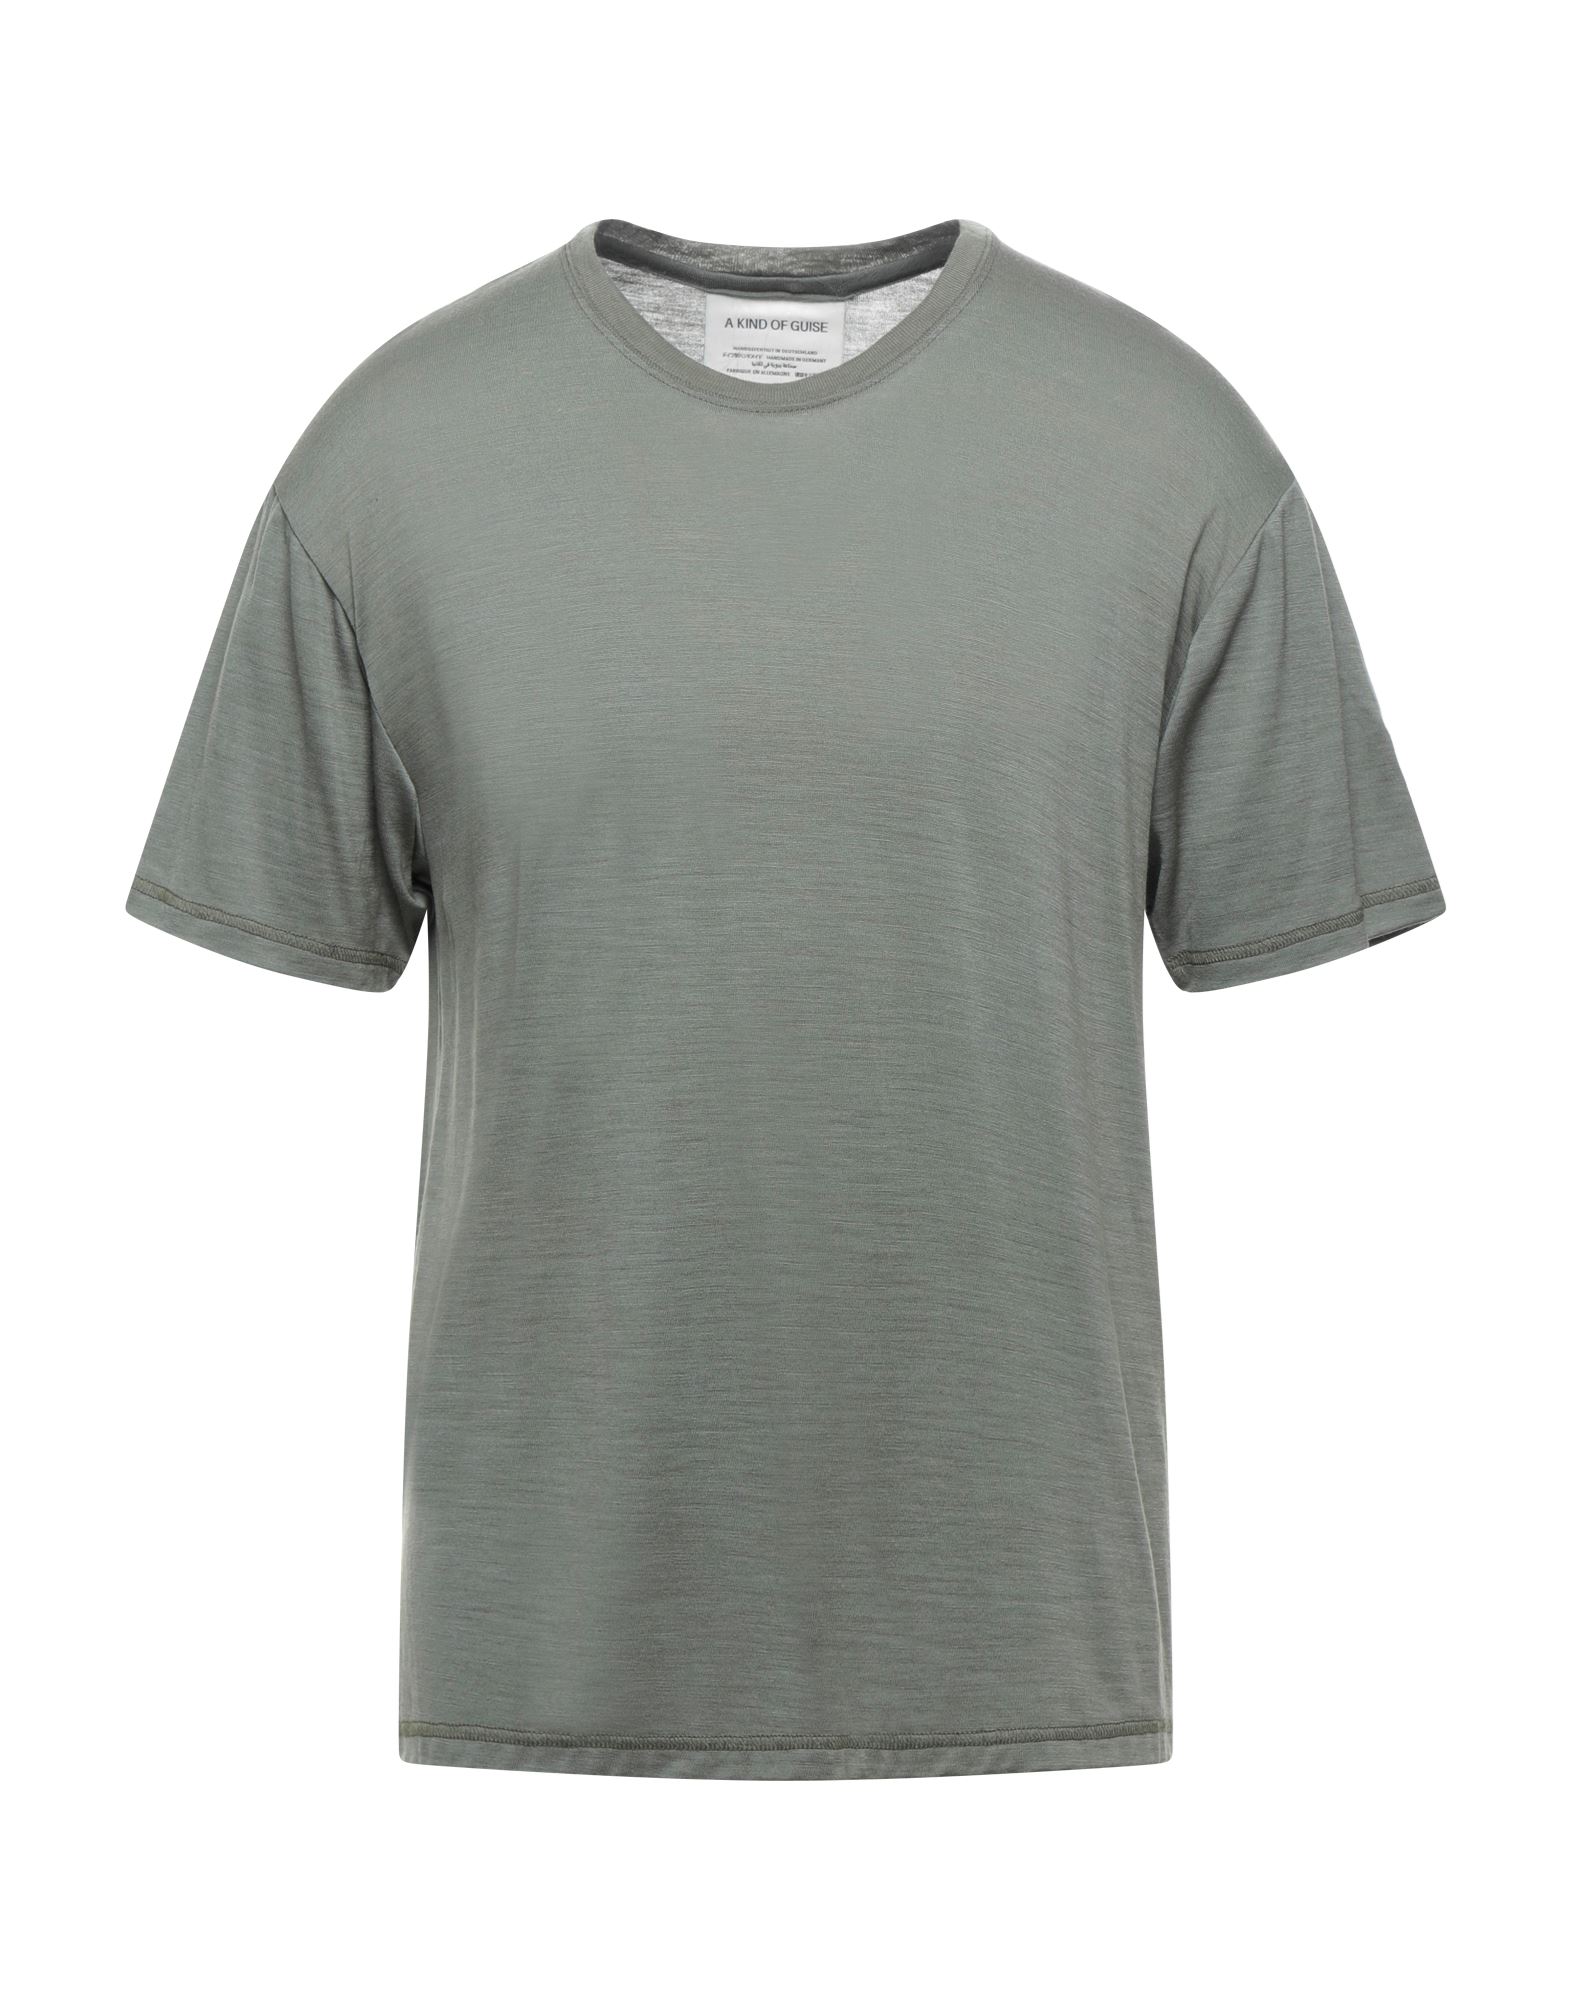 A Kind Of Guise T-shirts In Military Green